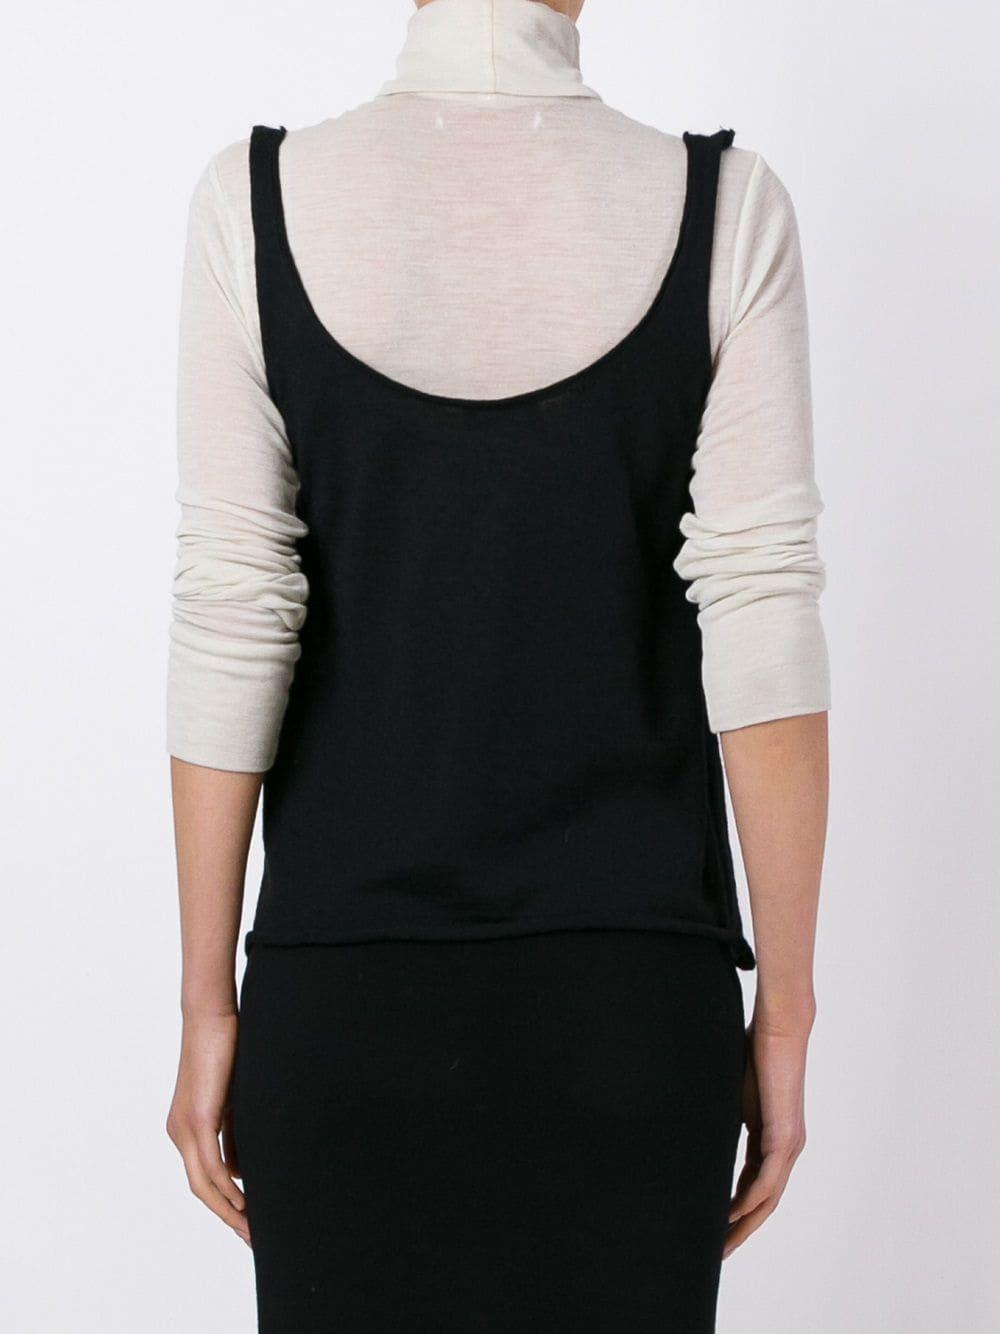 Le Kasha Cashmere 'hao' Knit Tank Top in Black - Lyst